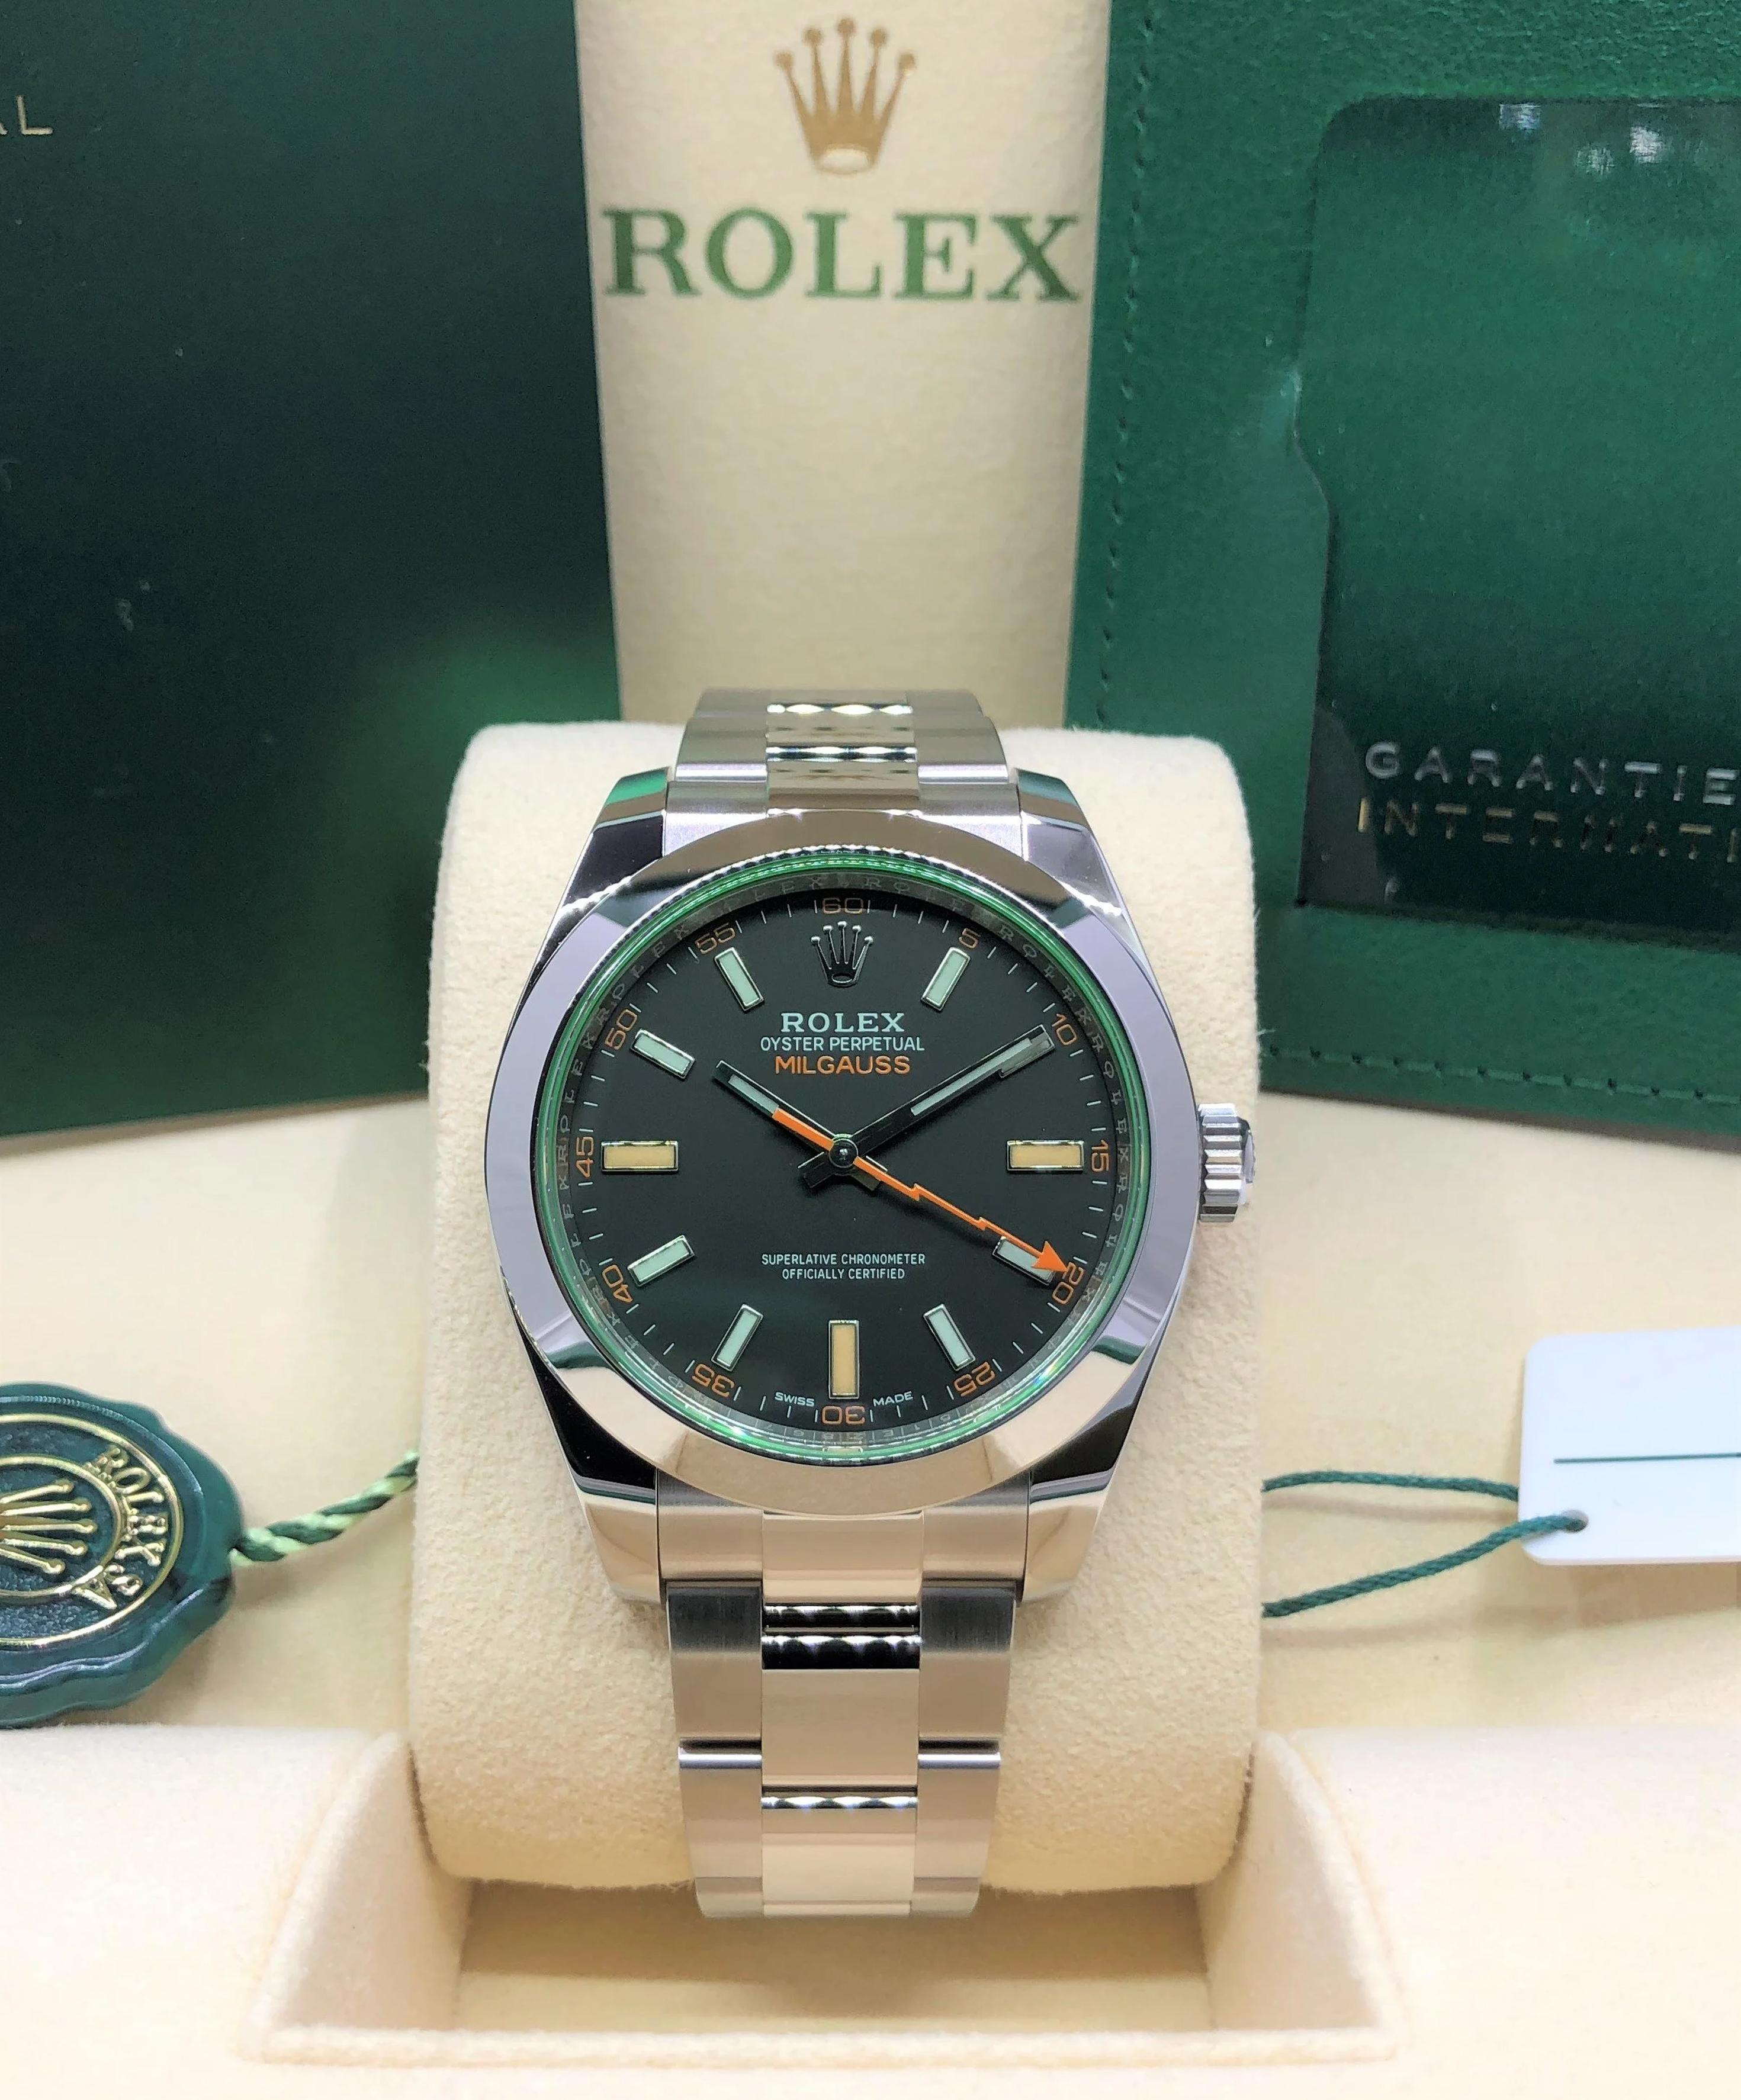 Rolex Milgauss 116400GV has Silver-tone stainless steel case with a silver-tone stainless steel Rolex oyster bracelet. Fixed domed silver-tone stainless steel bezel. Black dial with luminous hands and luminous stick hour markers. Minute markers